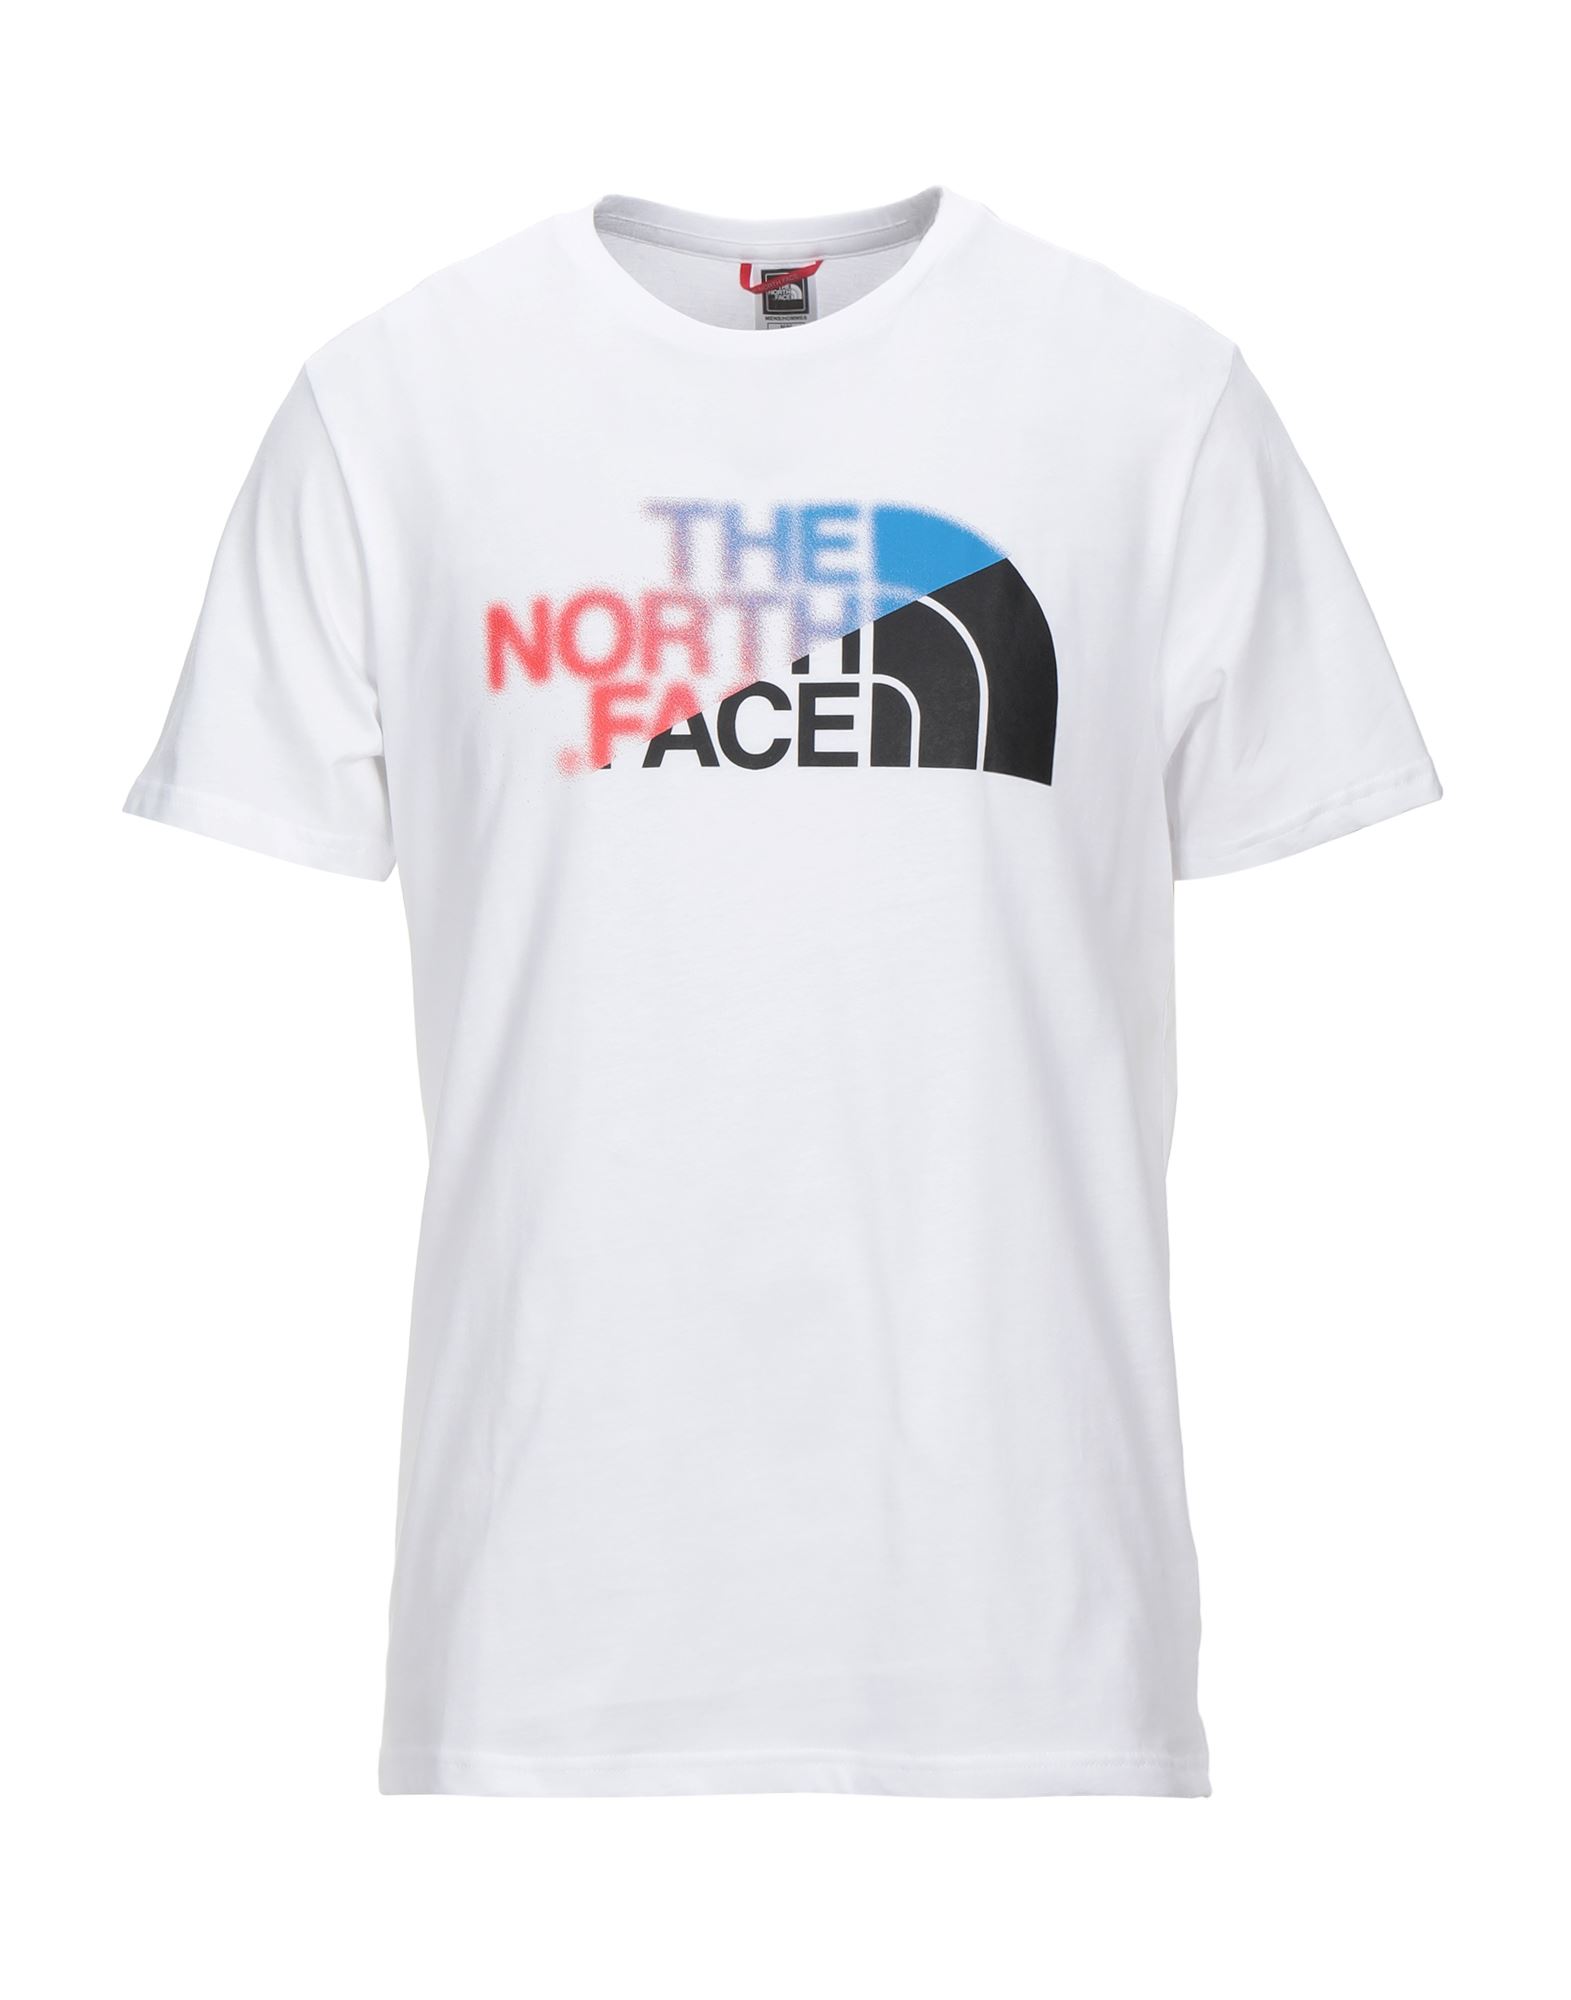 THE NORTH FACE T-shirts - Item 12528941